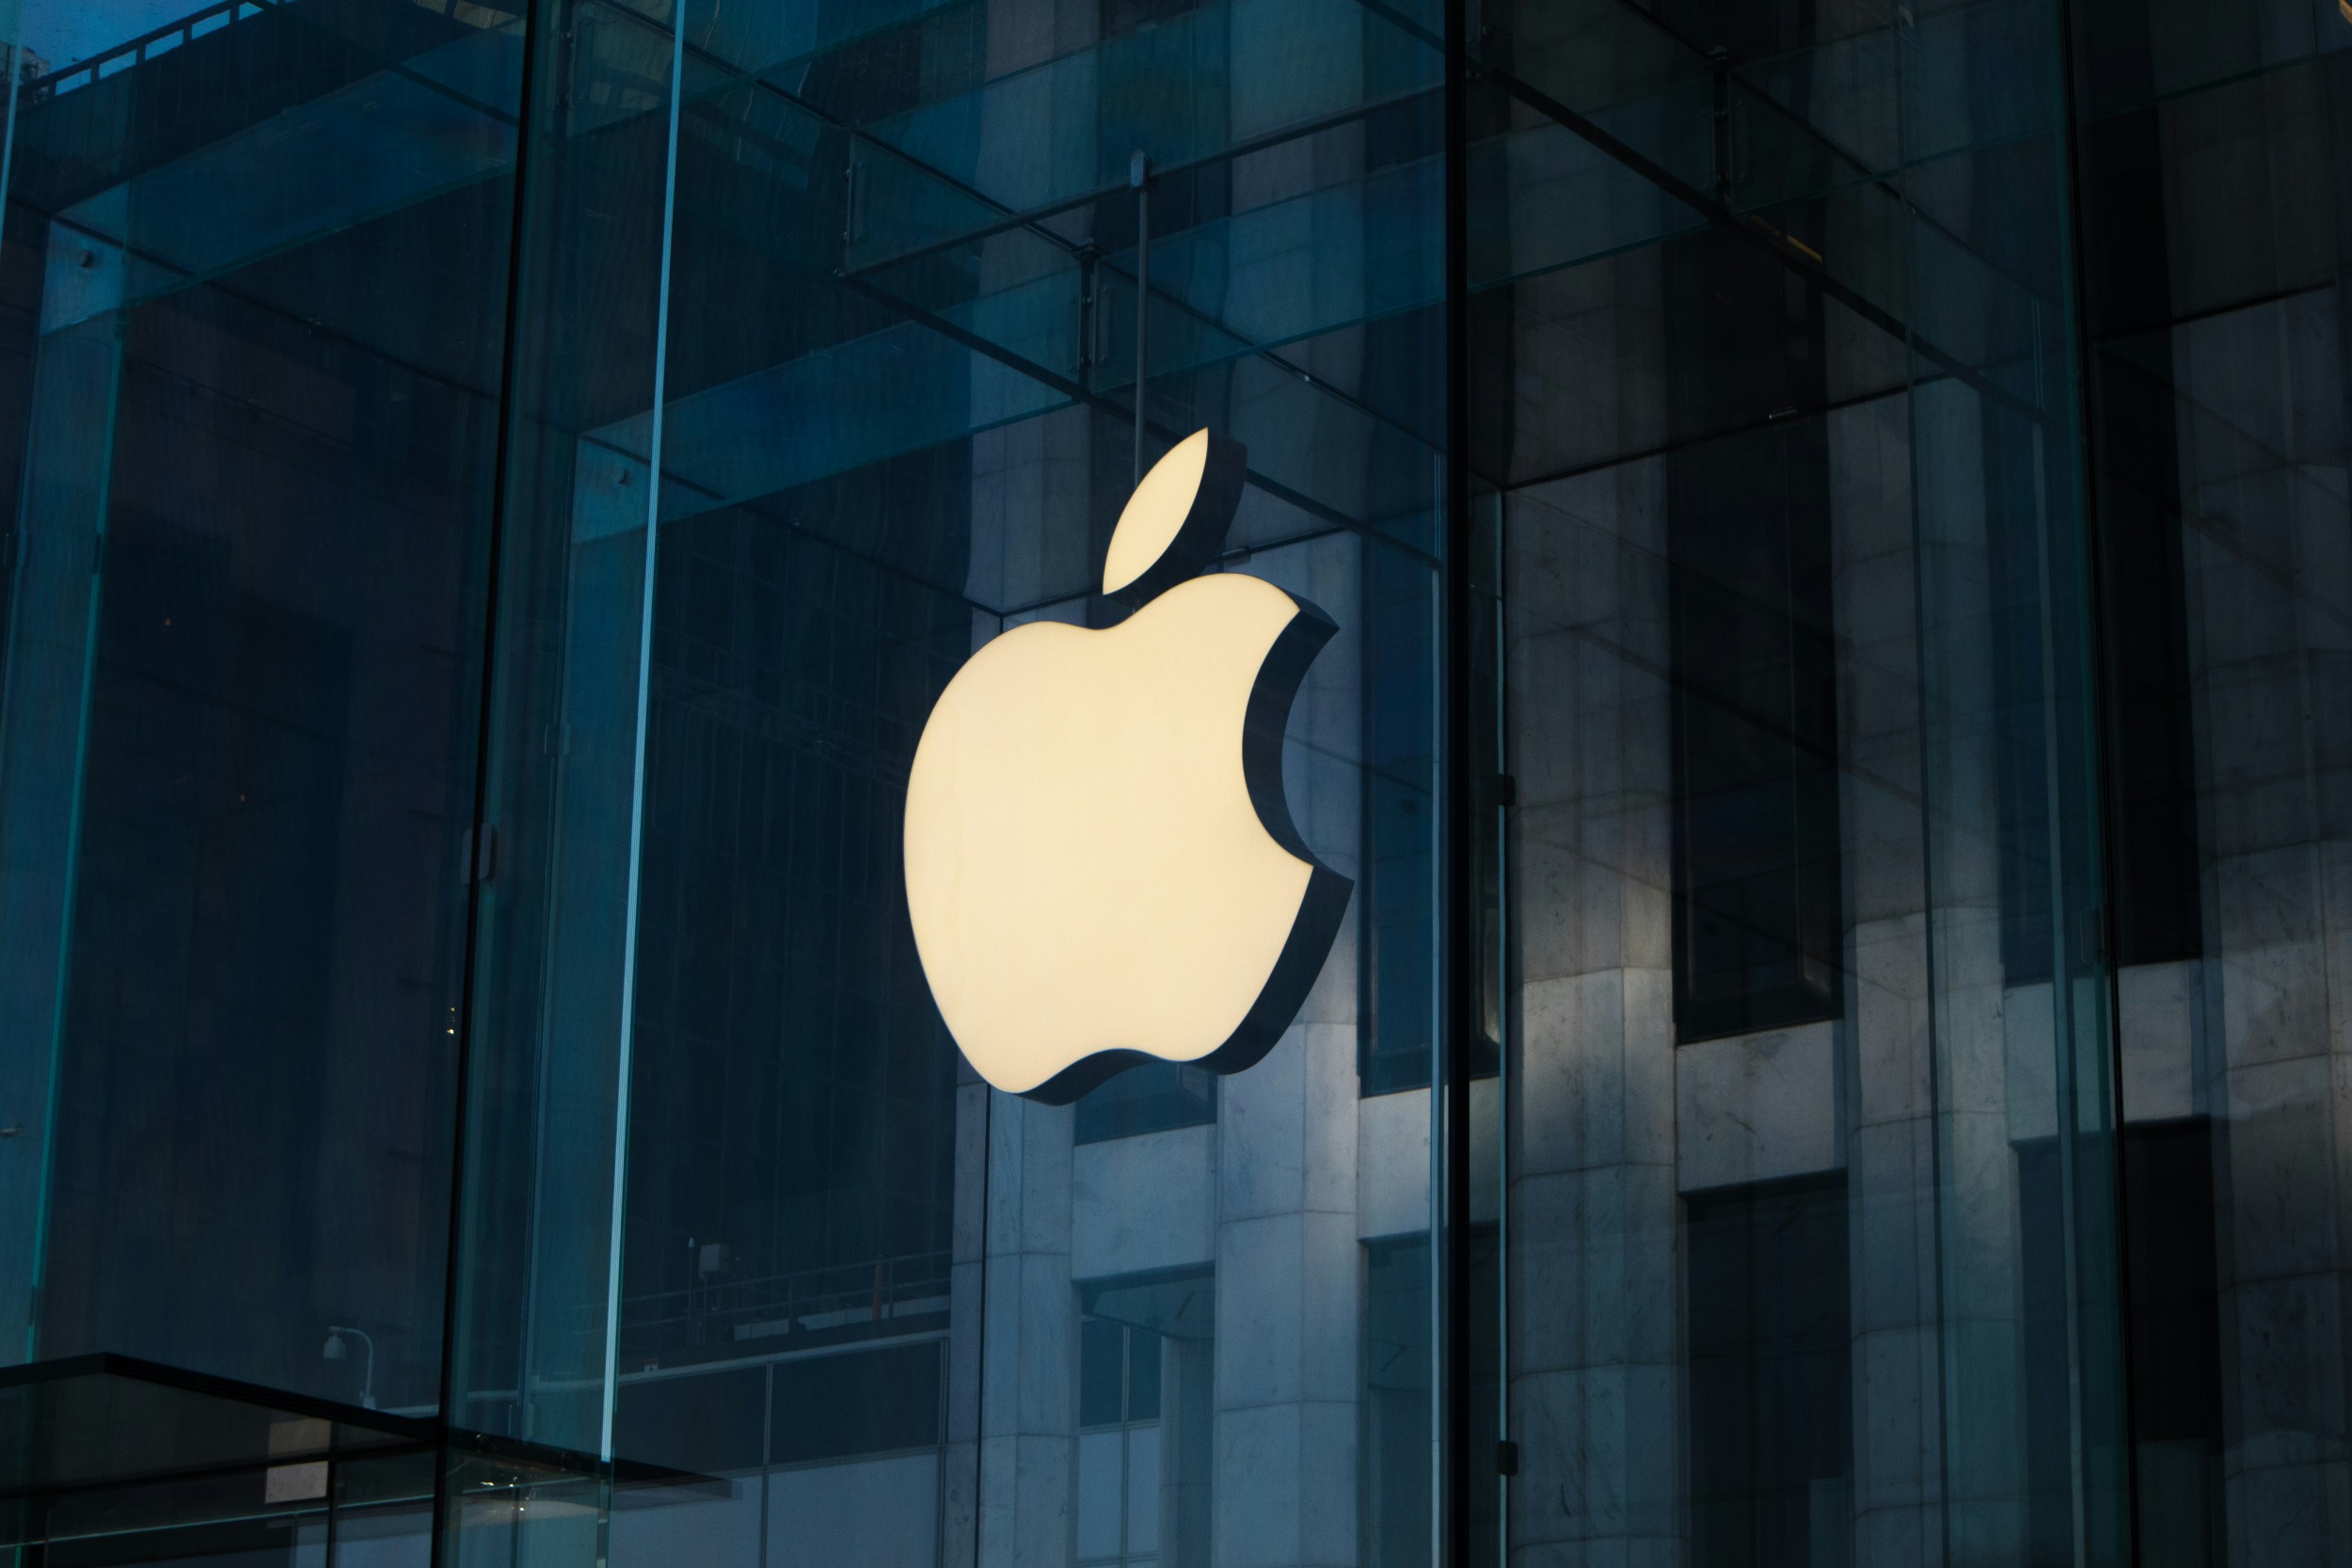 Protection or Restriction? US demands control of Apple